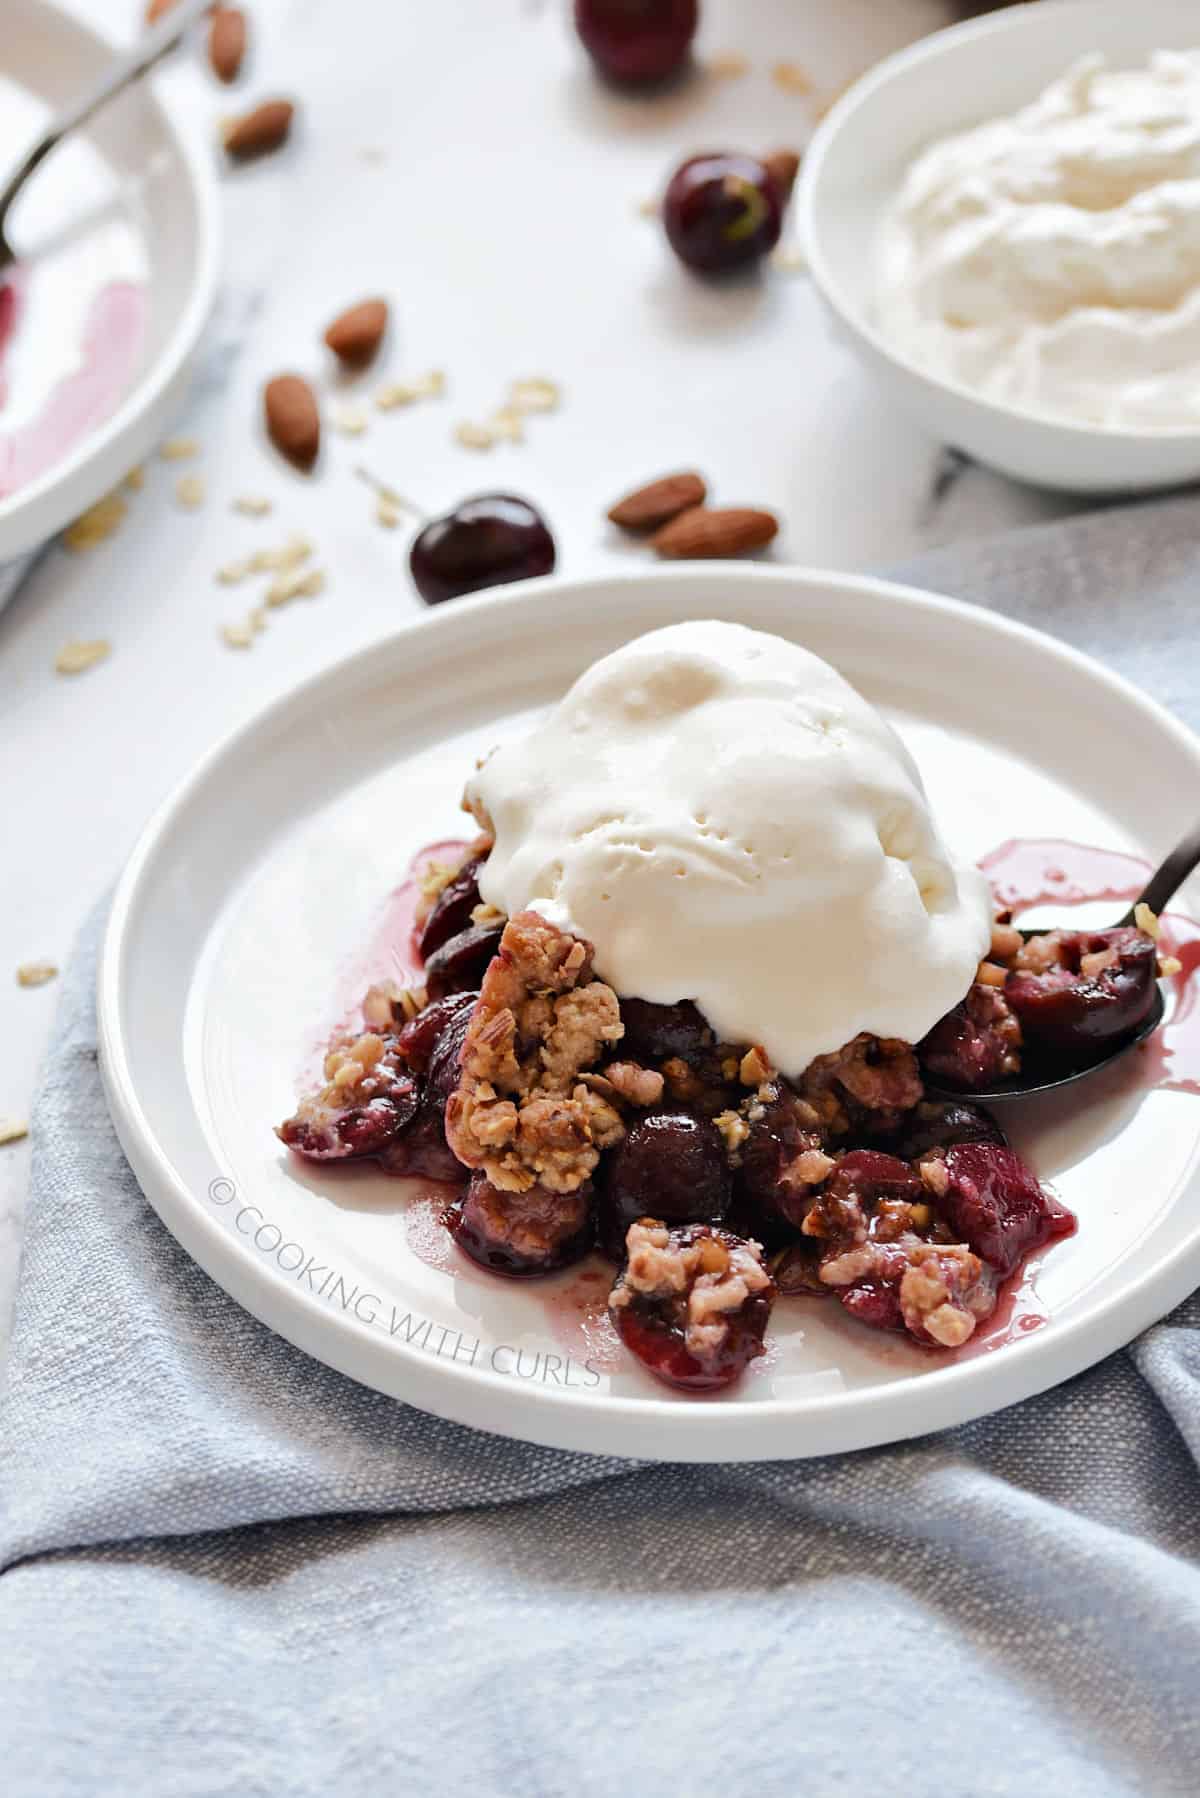 Fresh, baked cherry halves topped with a crunchy oat topping and vanilla ice cream on a small white plate.